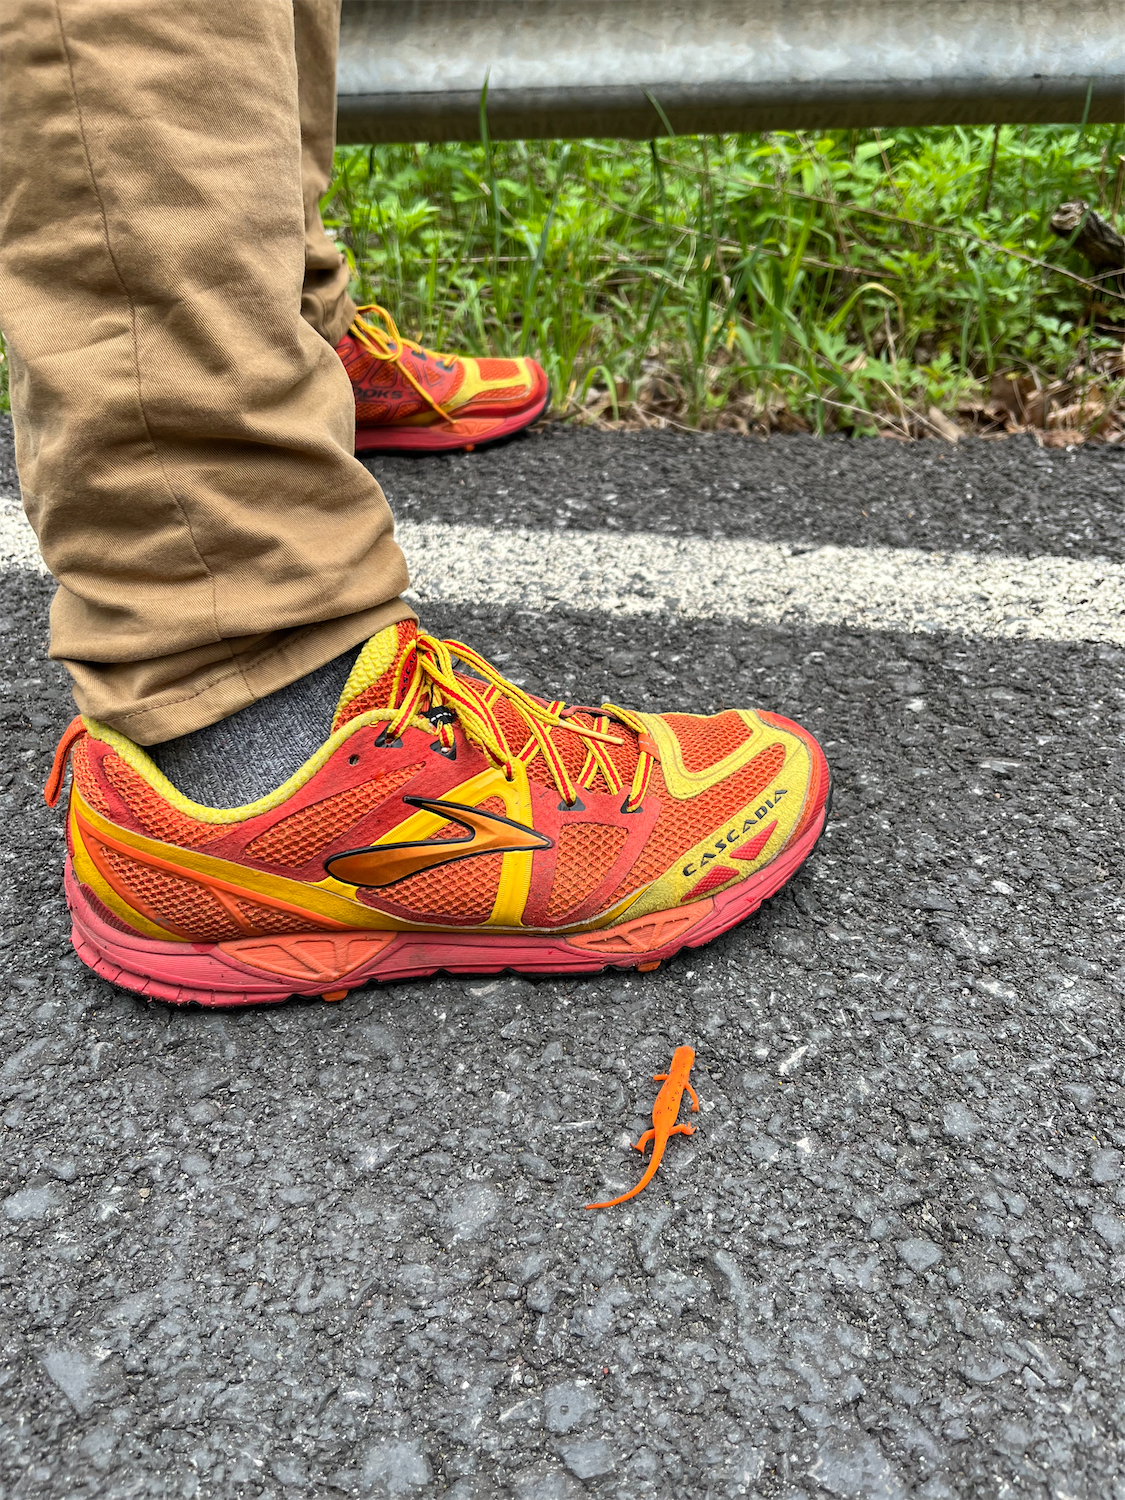 A small orange lizard approaches my foot. I'm wearing an orange hiking shoe that is the same hue as the lizard's skin. I'm standing on a road in upstate New York. There is grass in the background.